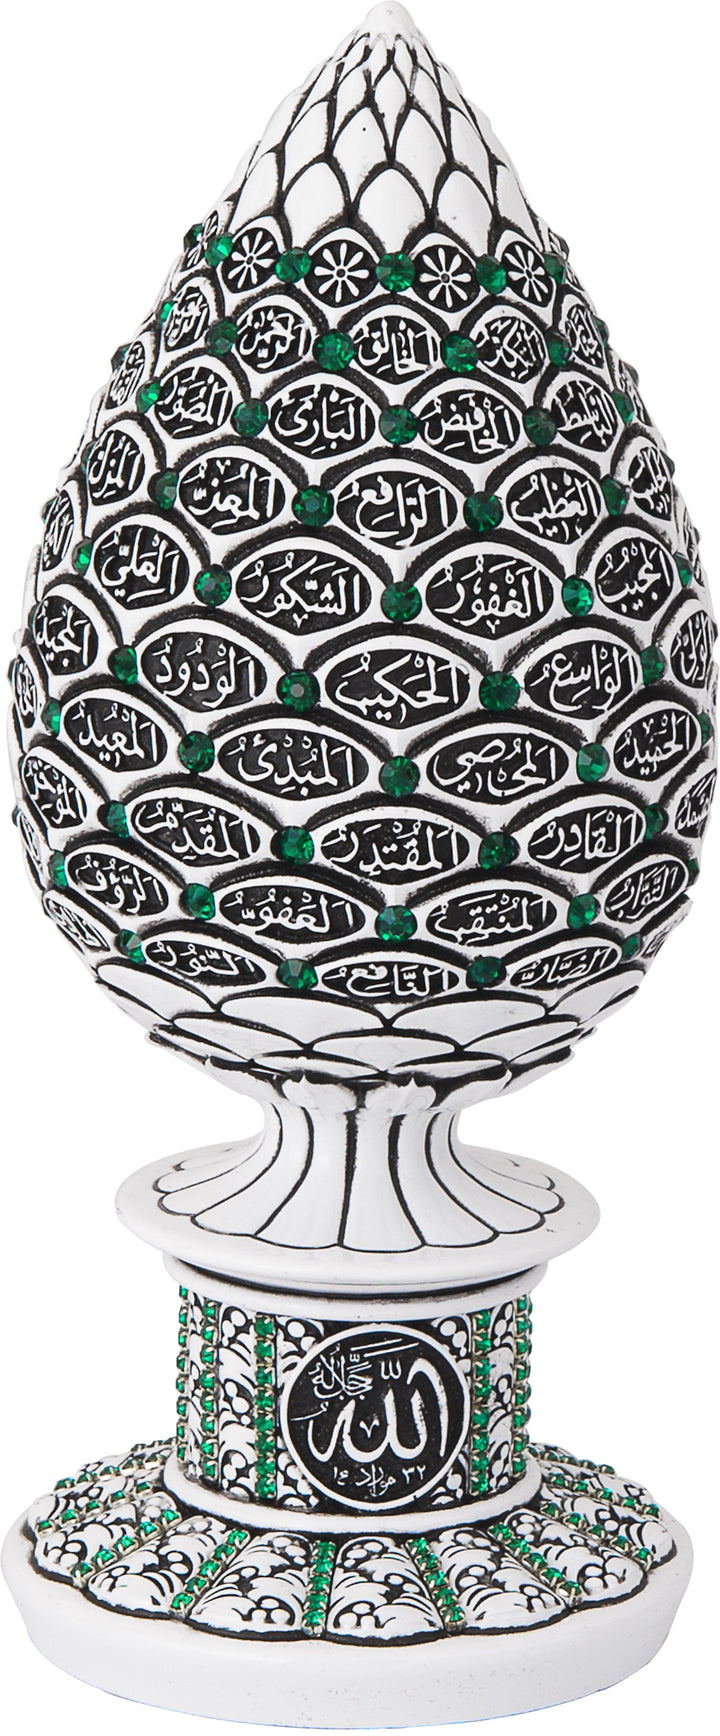 Islamic Table Decor Golden pine cone with green stones - 99 Names of Allah Alif collection BB-0913-1640-theislamicshop.com